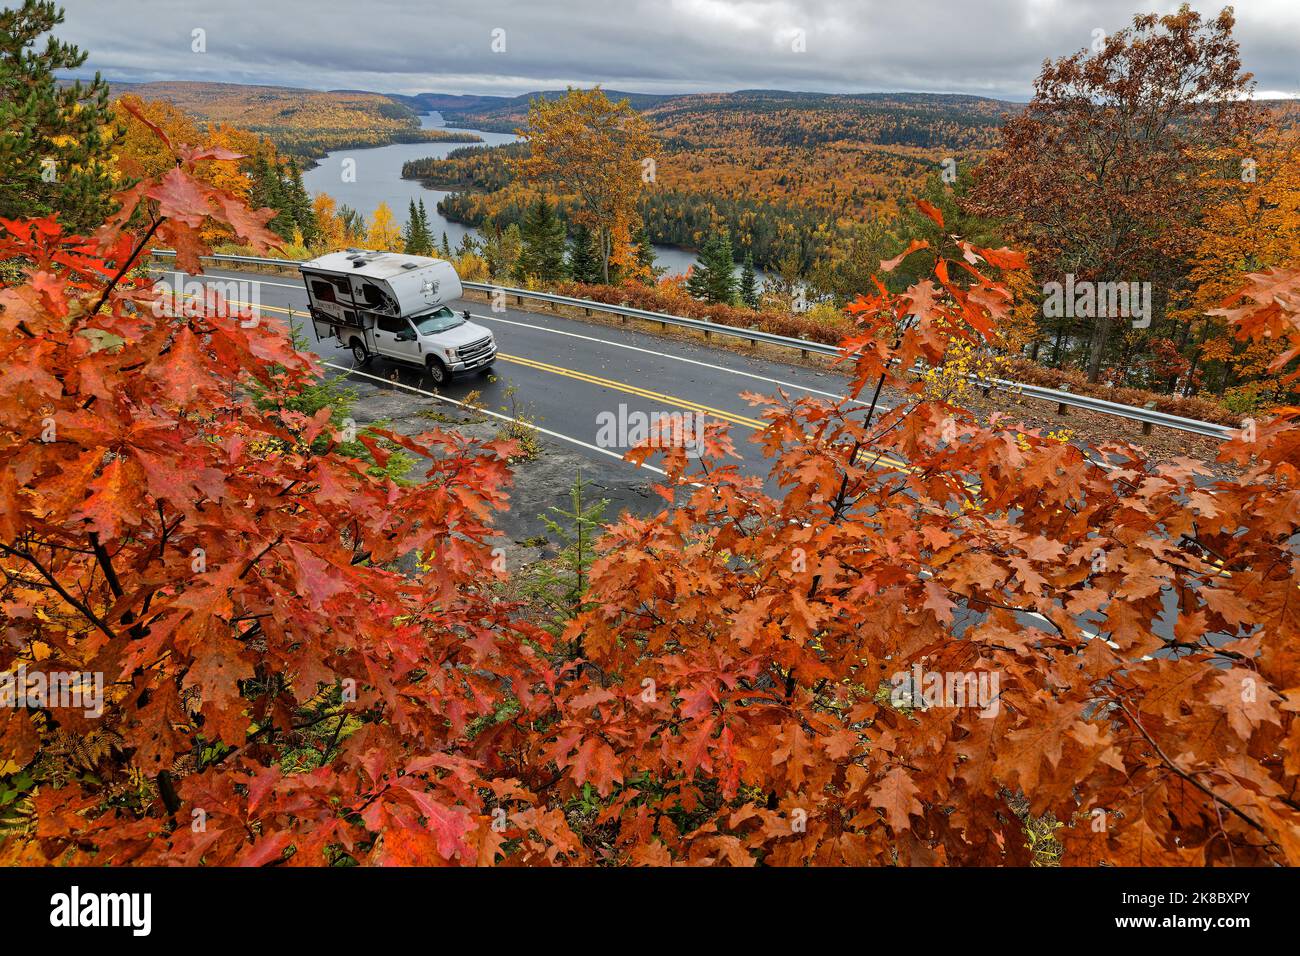 SHAWINIGAN, CANADA, October 4, 2022 : On the road of Parc National de La Mauricie in a beautiful lake and forests landscape. Stock Photo